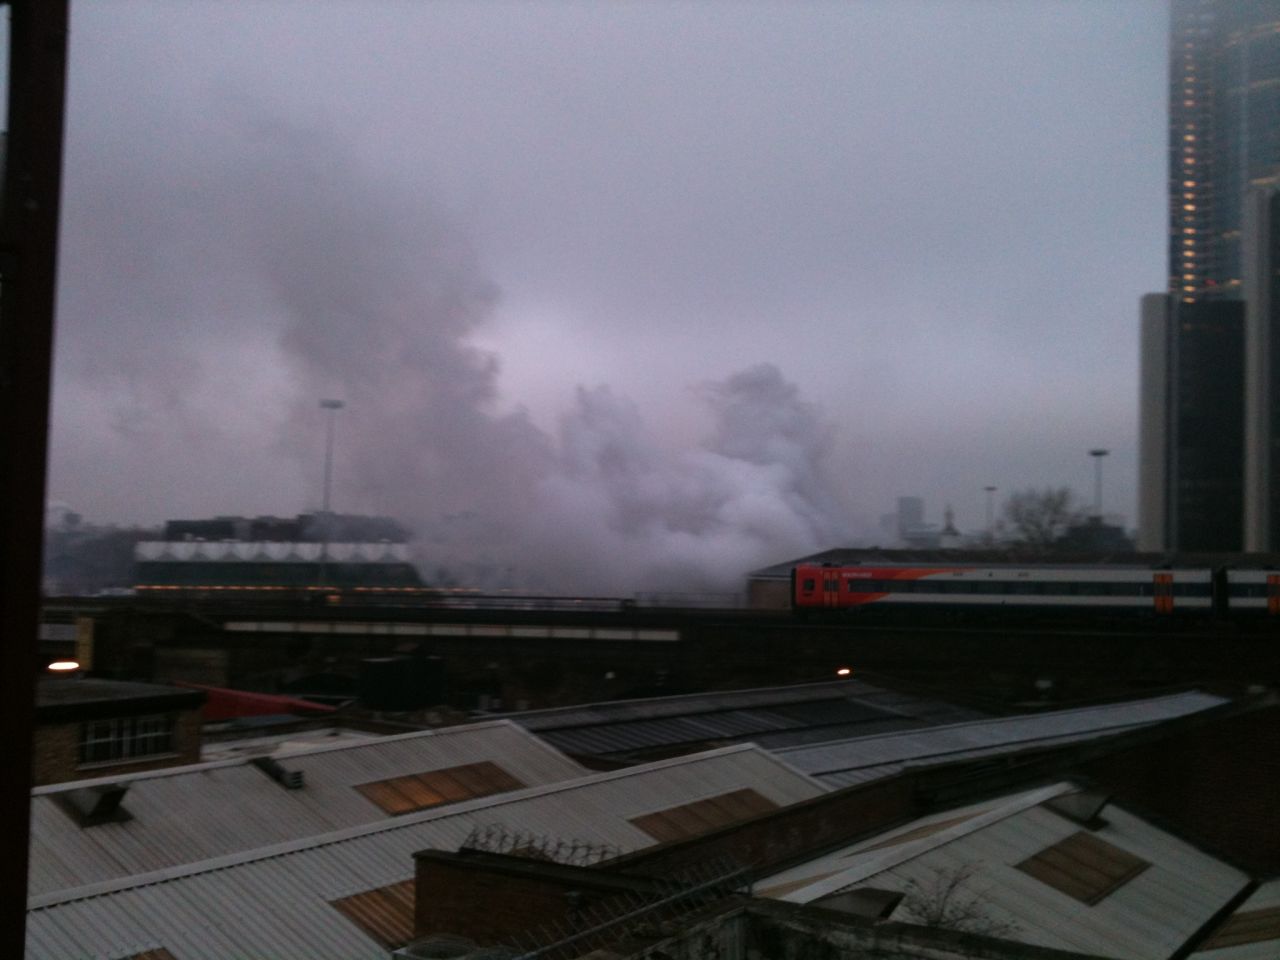 Smoke billows over central London's Vauxhall Cross area after a helicopter crash on the morning of January 16.